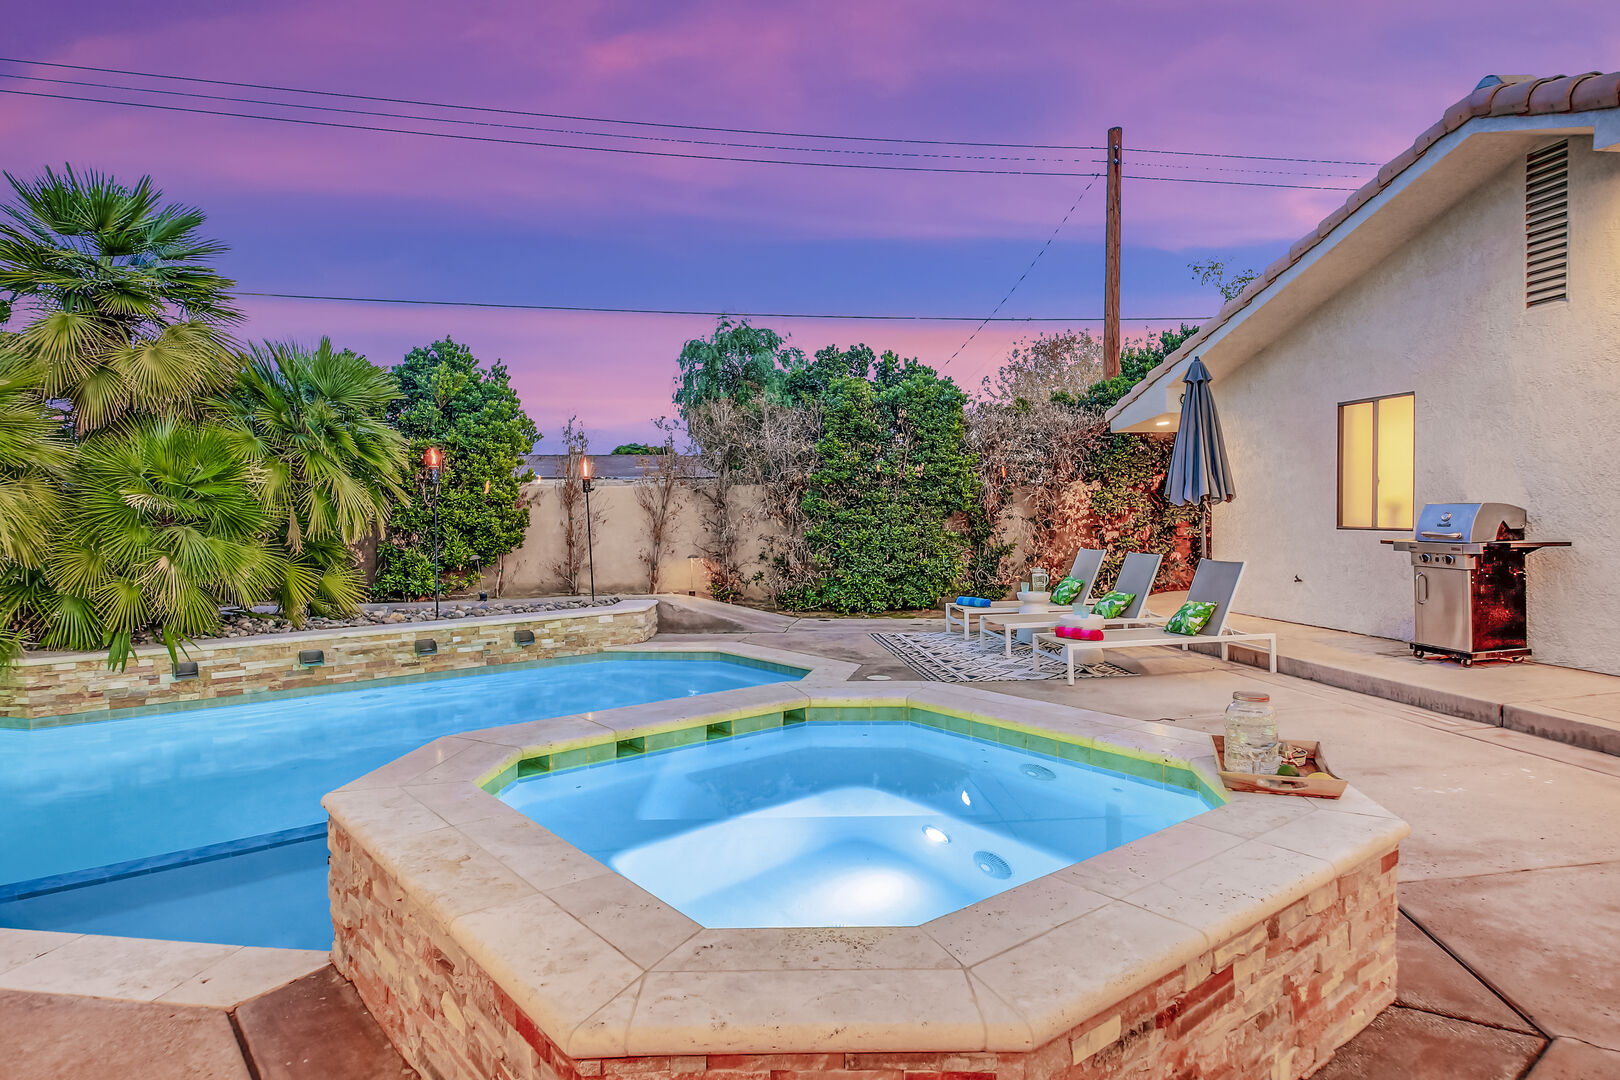 This resort-style home is located in the world-famous community of La Quinta Cove and is perfect for all your vacation needs.